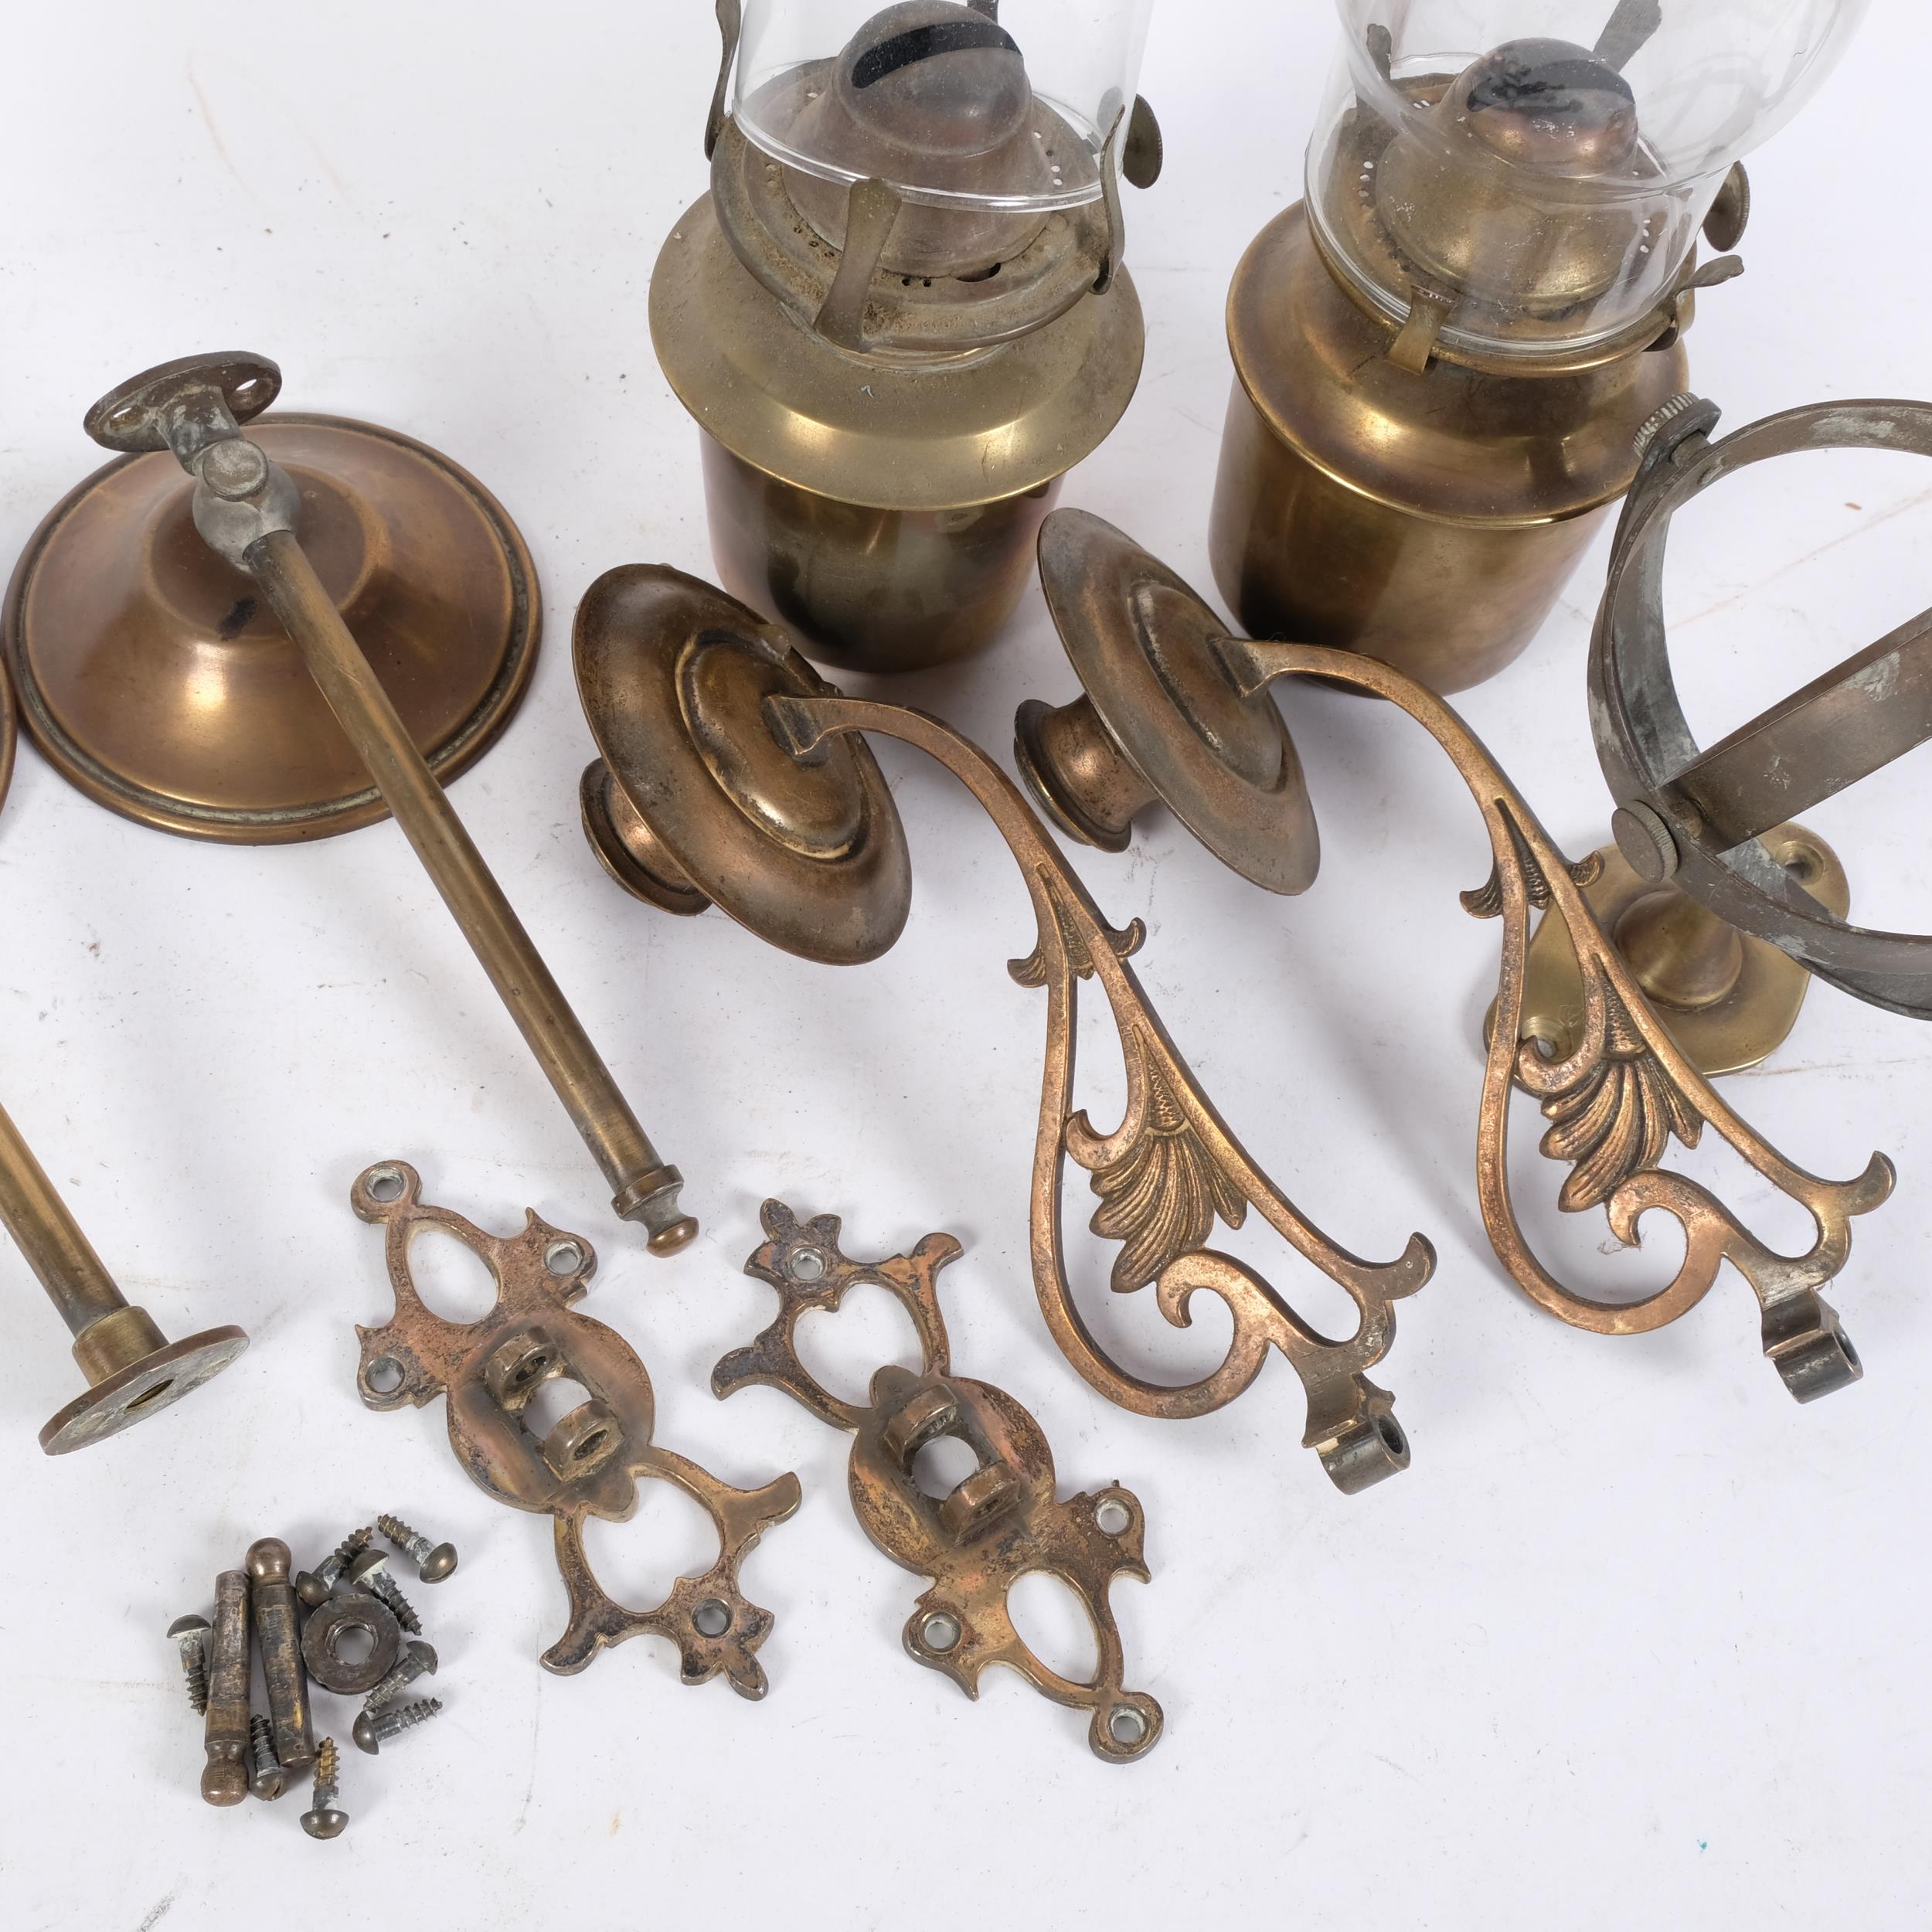 2 Antique gimballed brass oil lamps, etc - Image 2 of 2